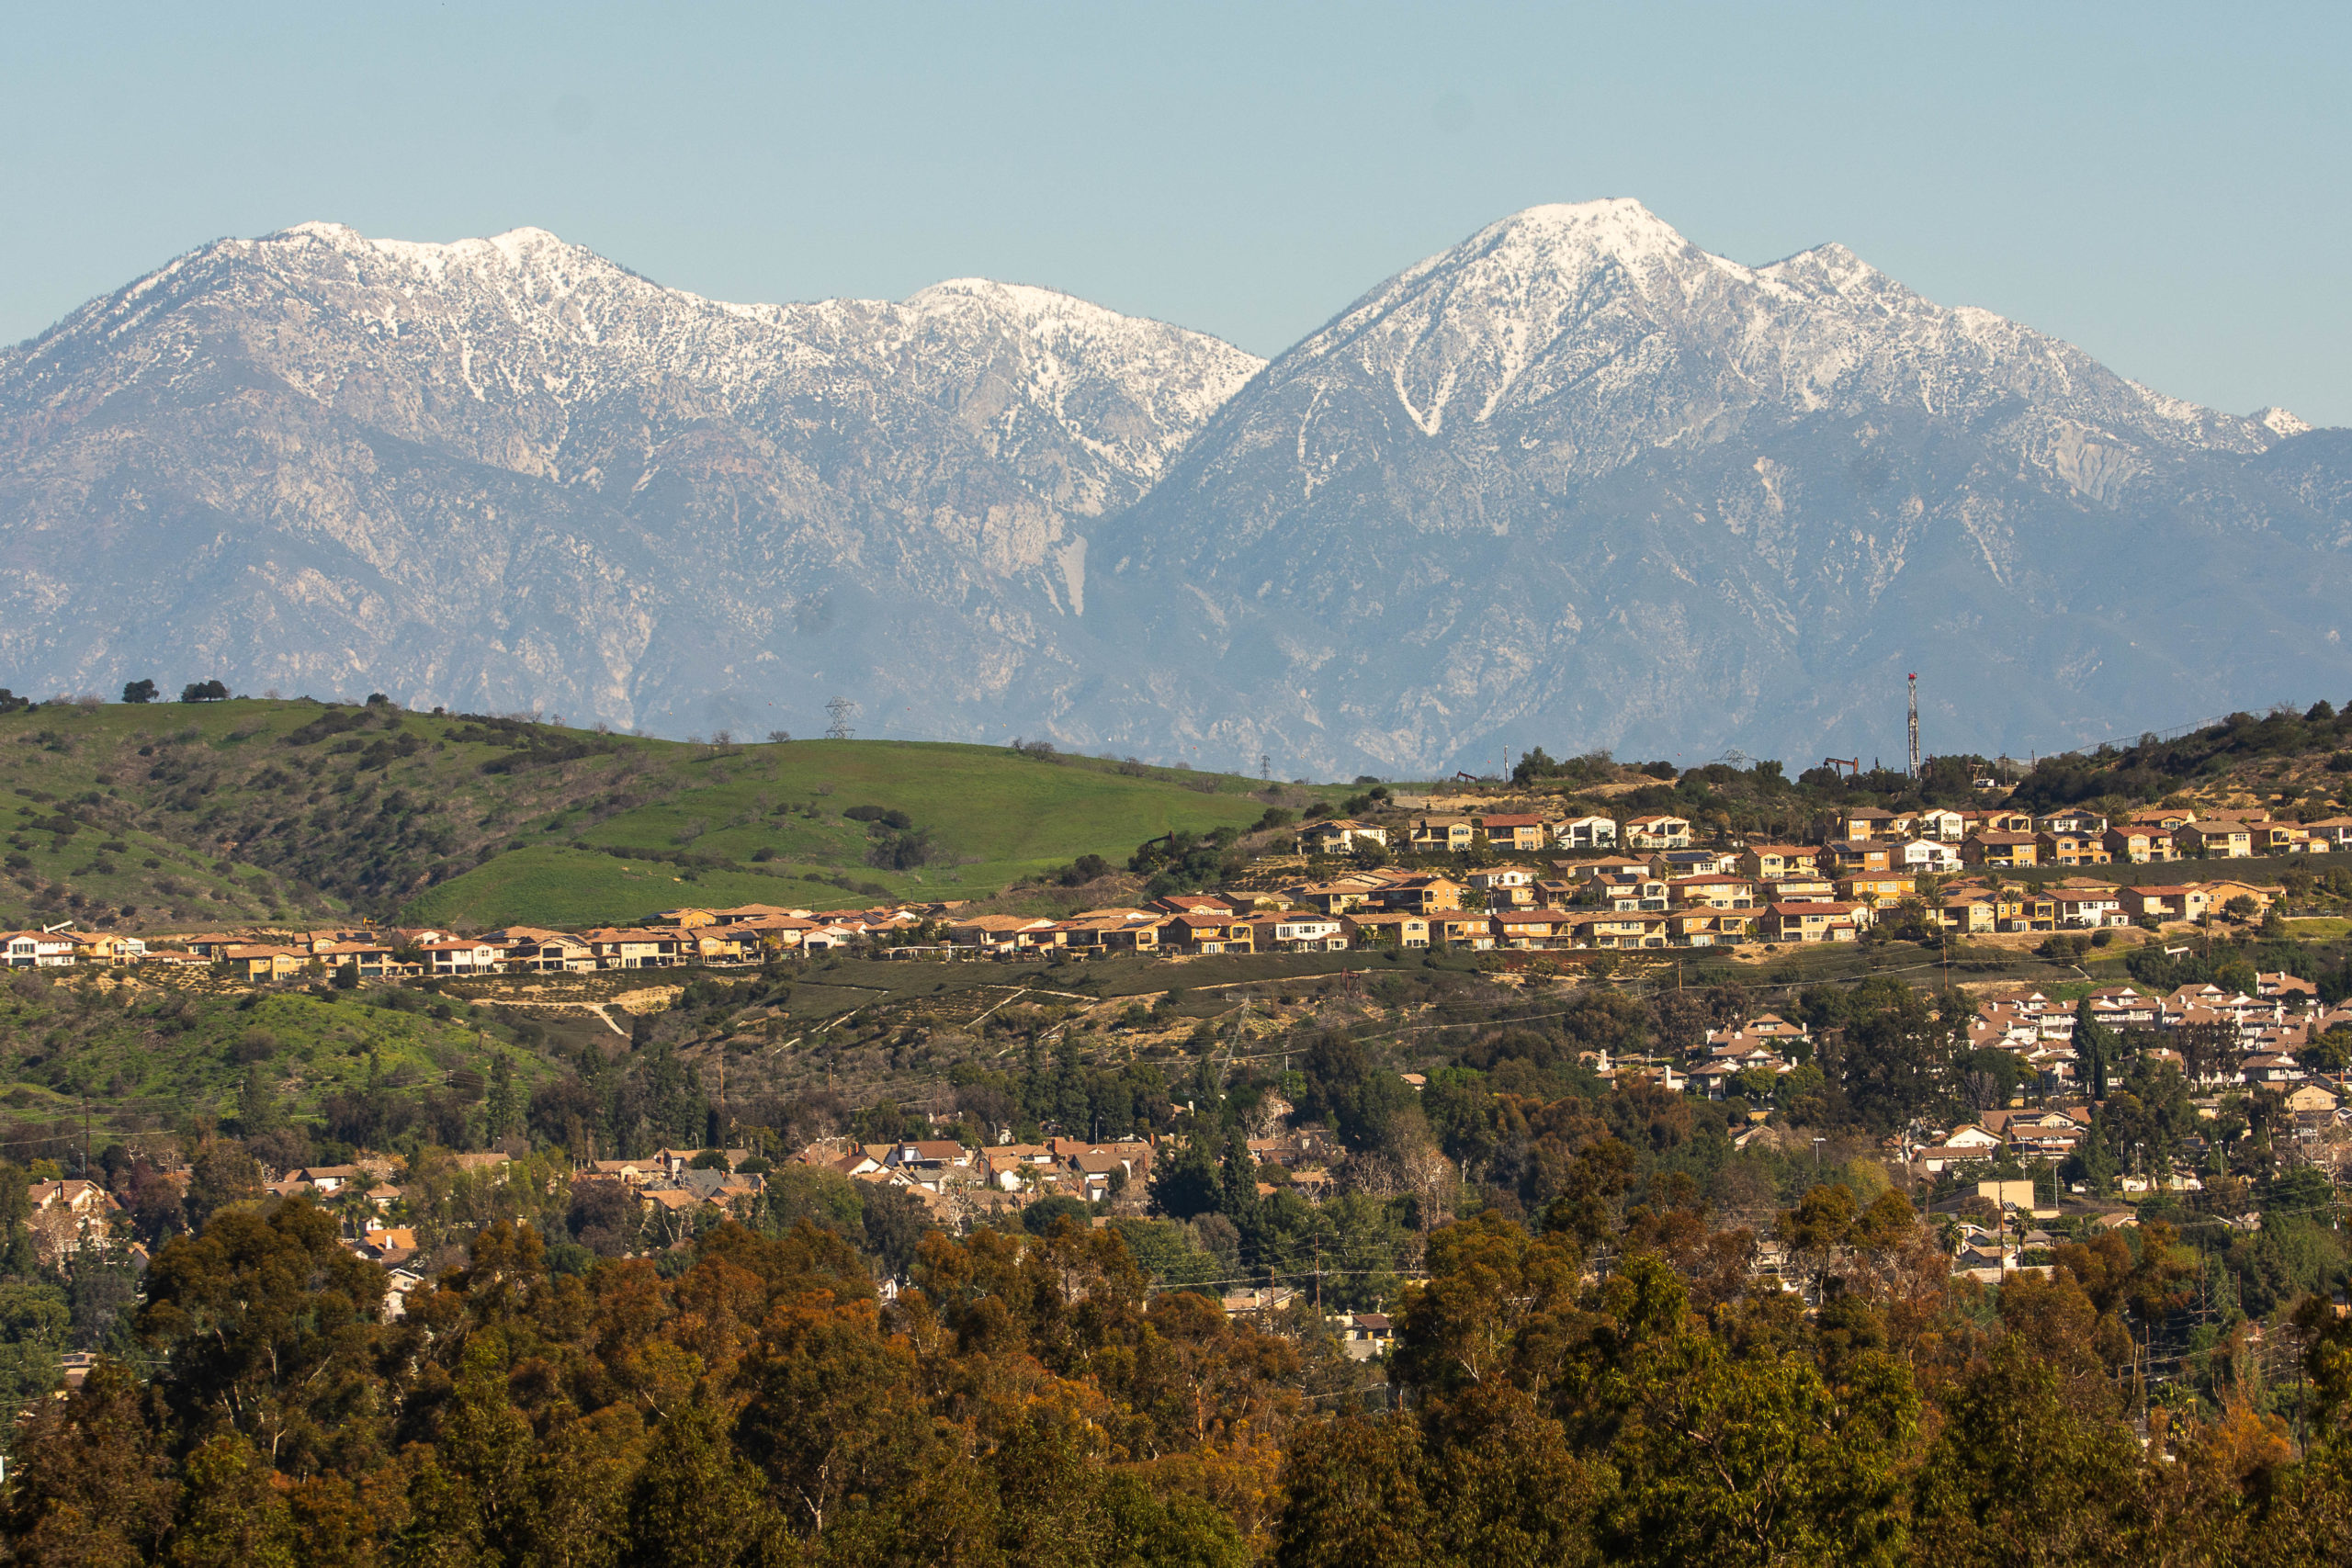 Snow can be seen on the San Bernadino mountains can be seen from La Habra on a crisp Monday afternoon, January 23, 2023.